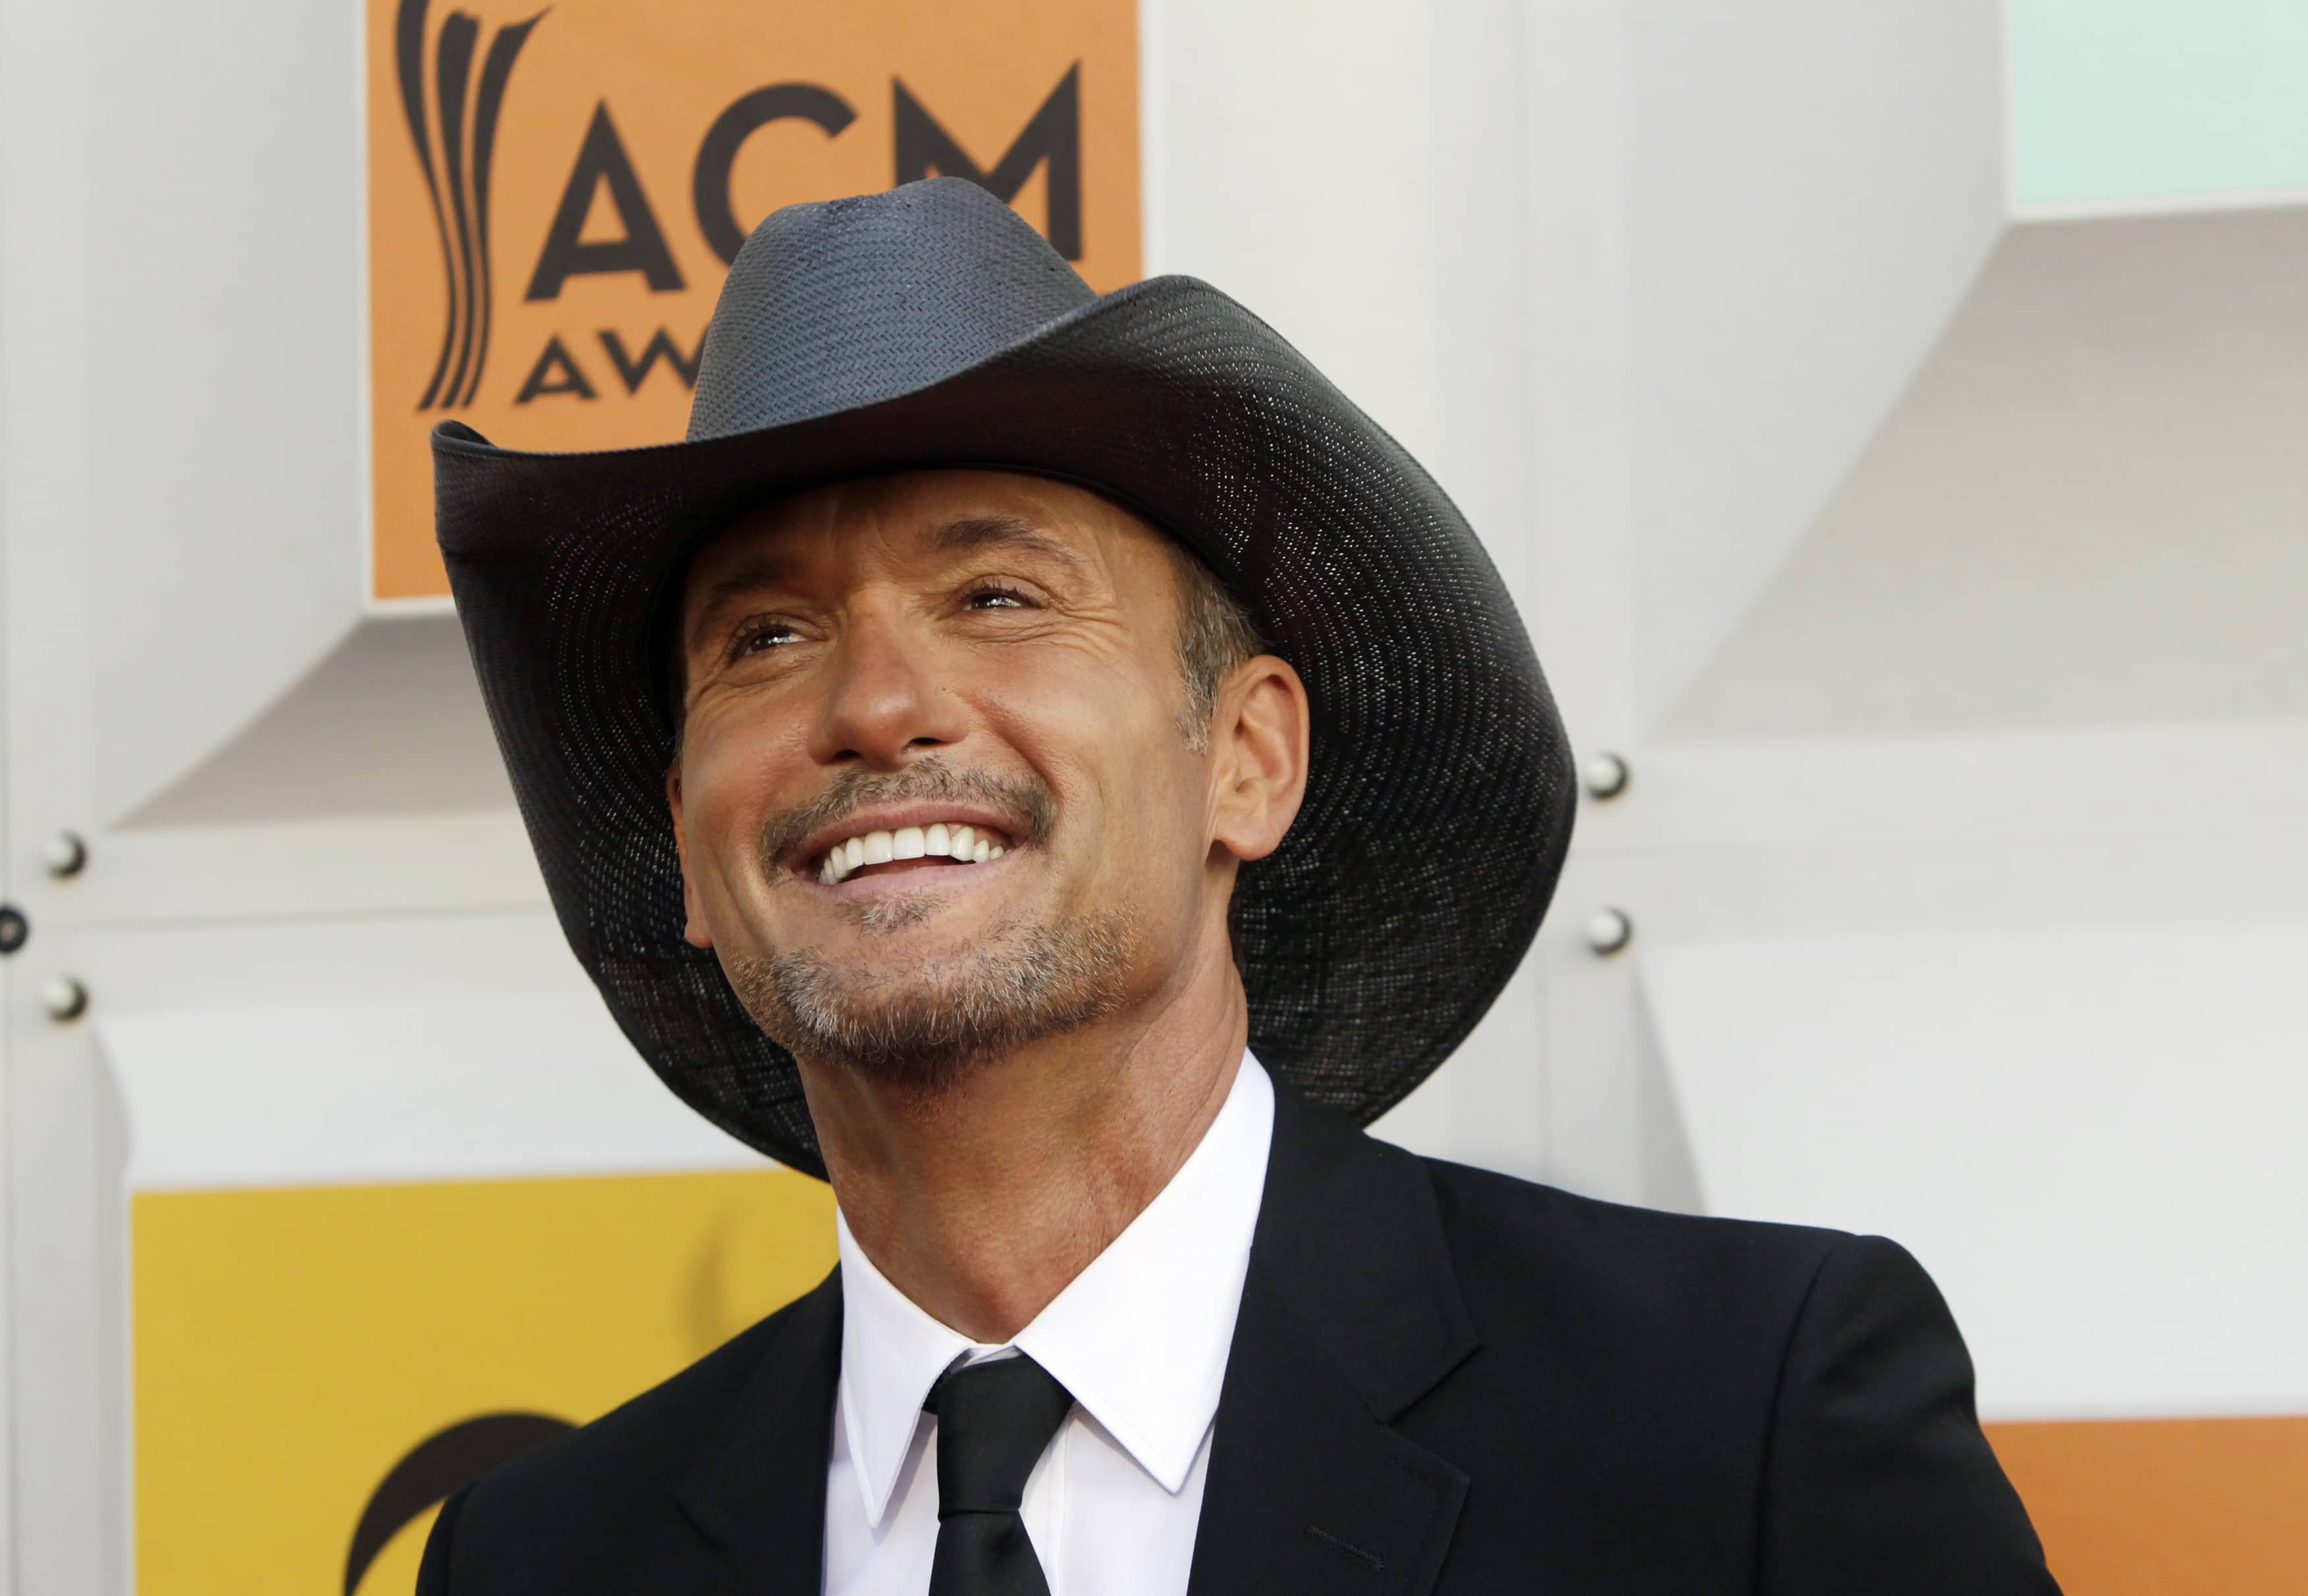 tim-mcgraw-arrives-at-the-51st-academy-of-country-music-awards-in-las-vegas